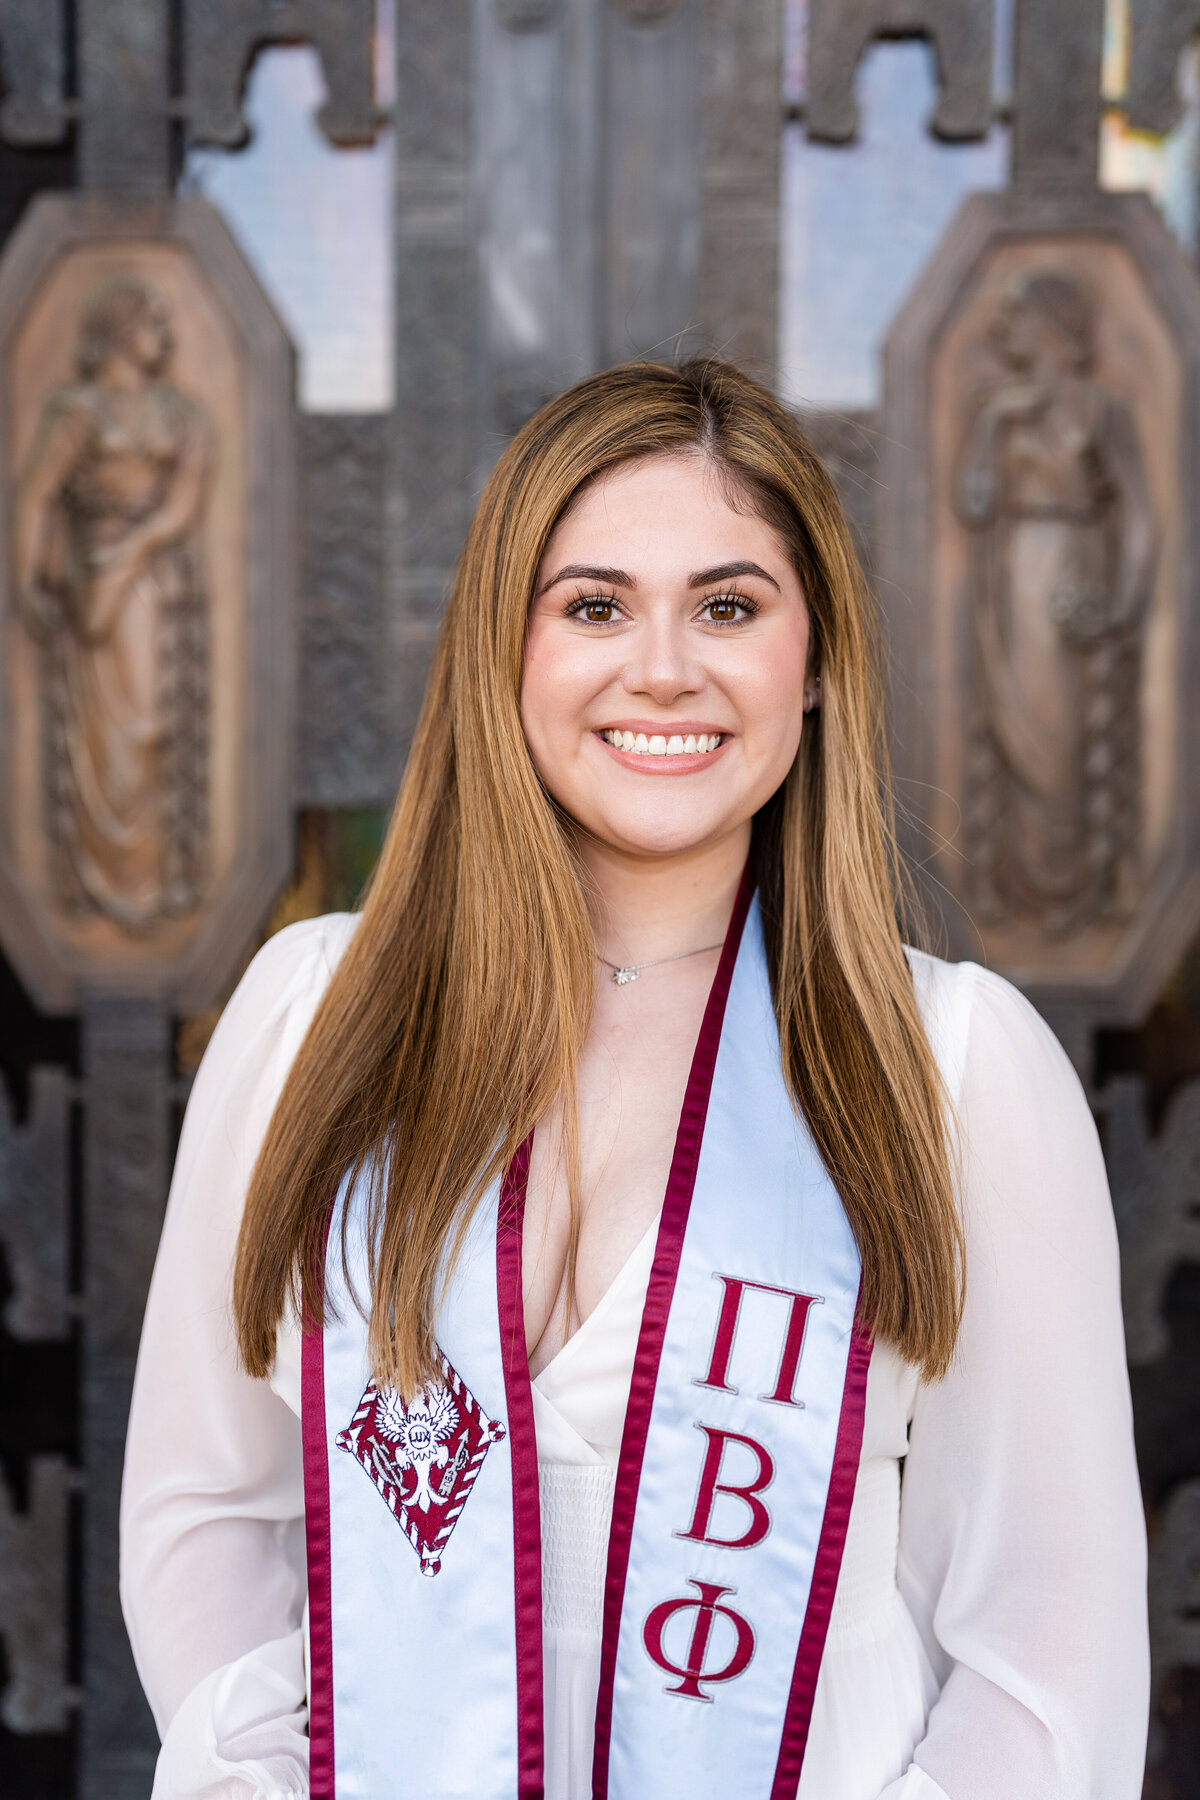 Texas A&M senior girl smiling and holding Pi Phi stole and white dress in front of Administration Building doors